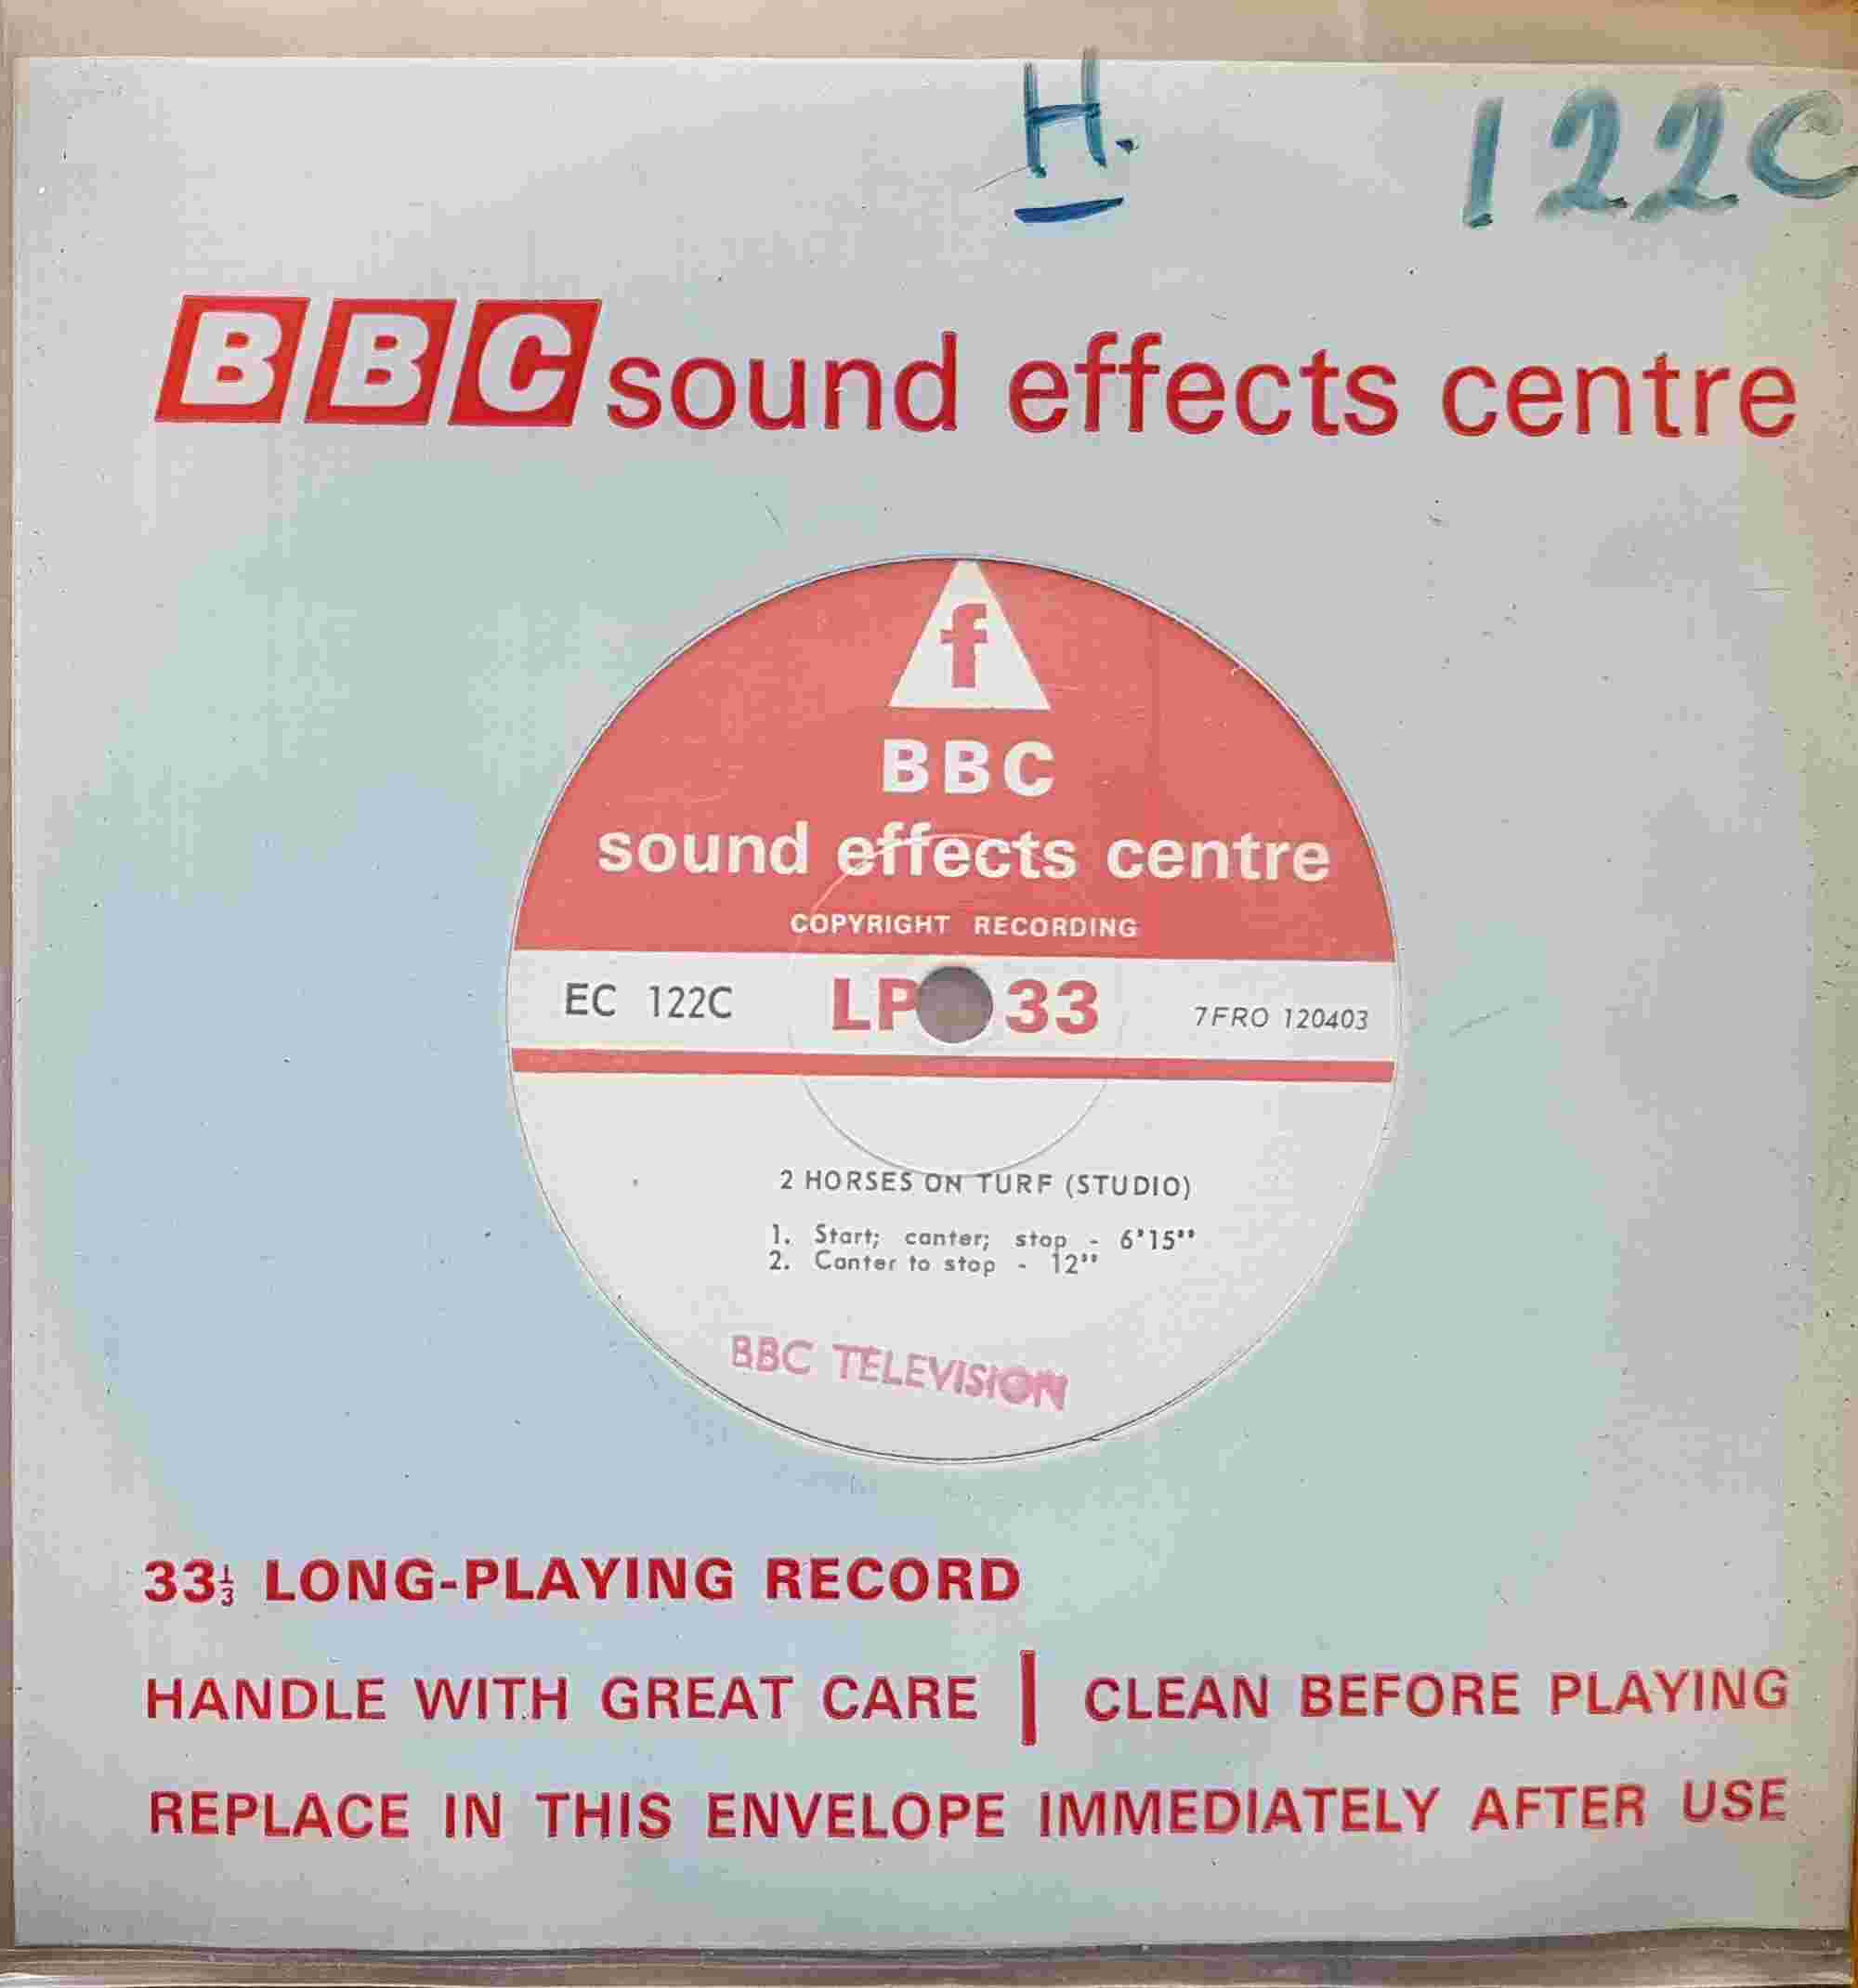 Picture of EC 122C 2 Horses on turf (Studio) by artist Not registered from the BBC records and Tapes library